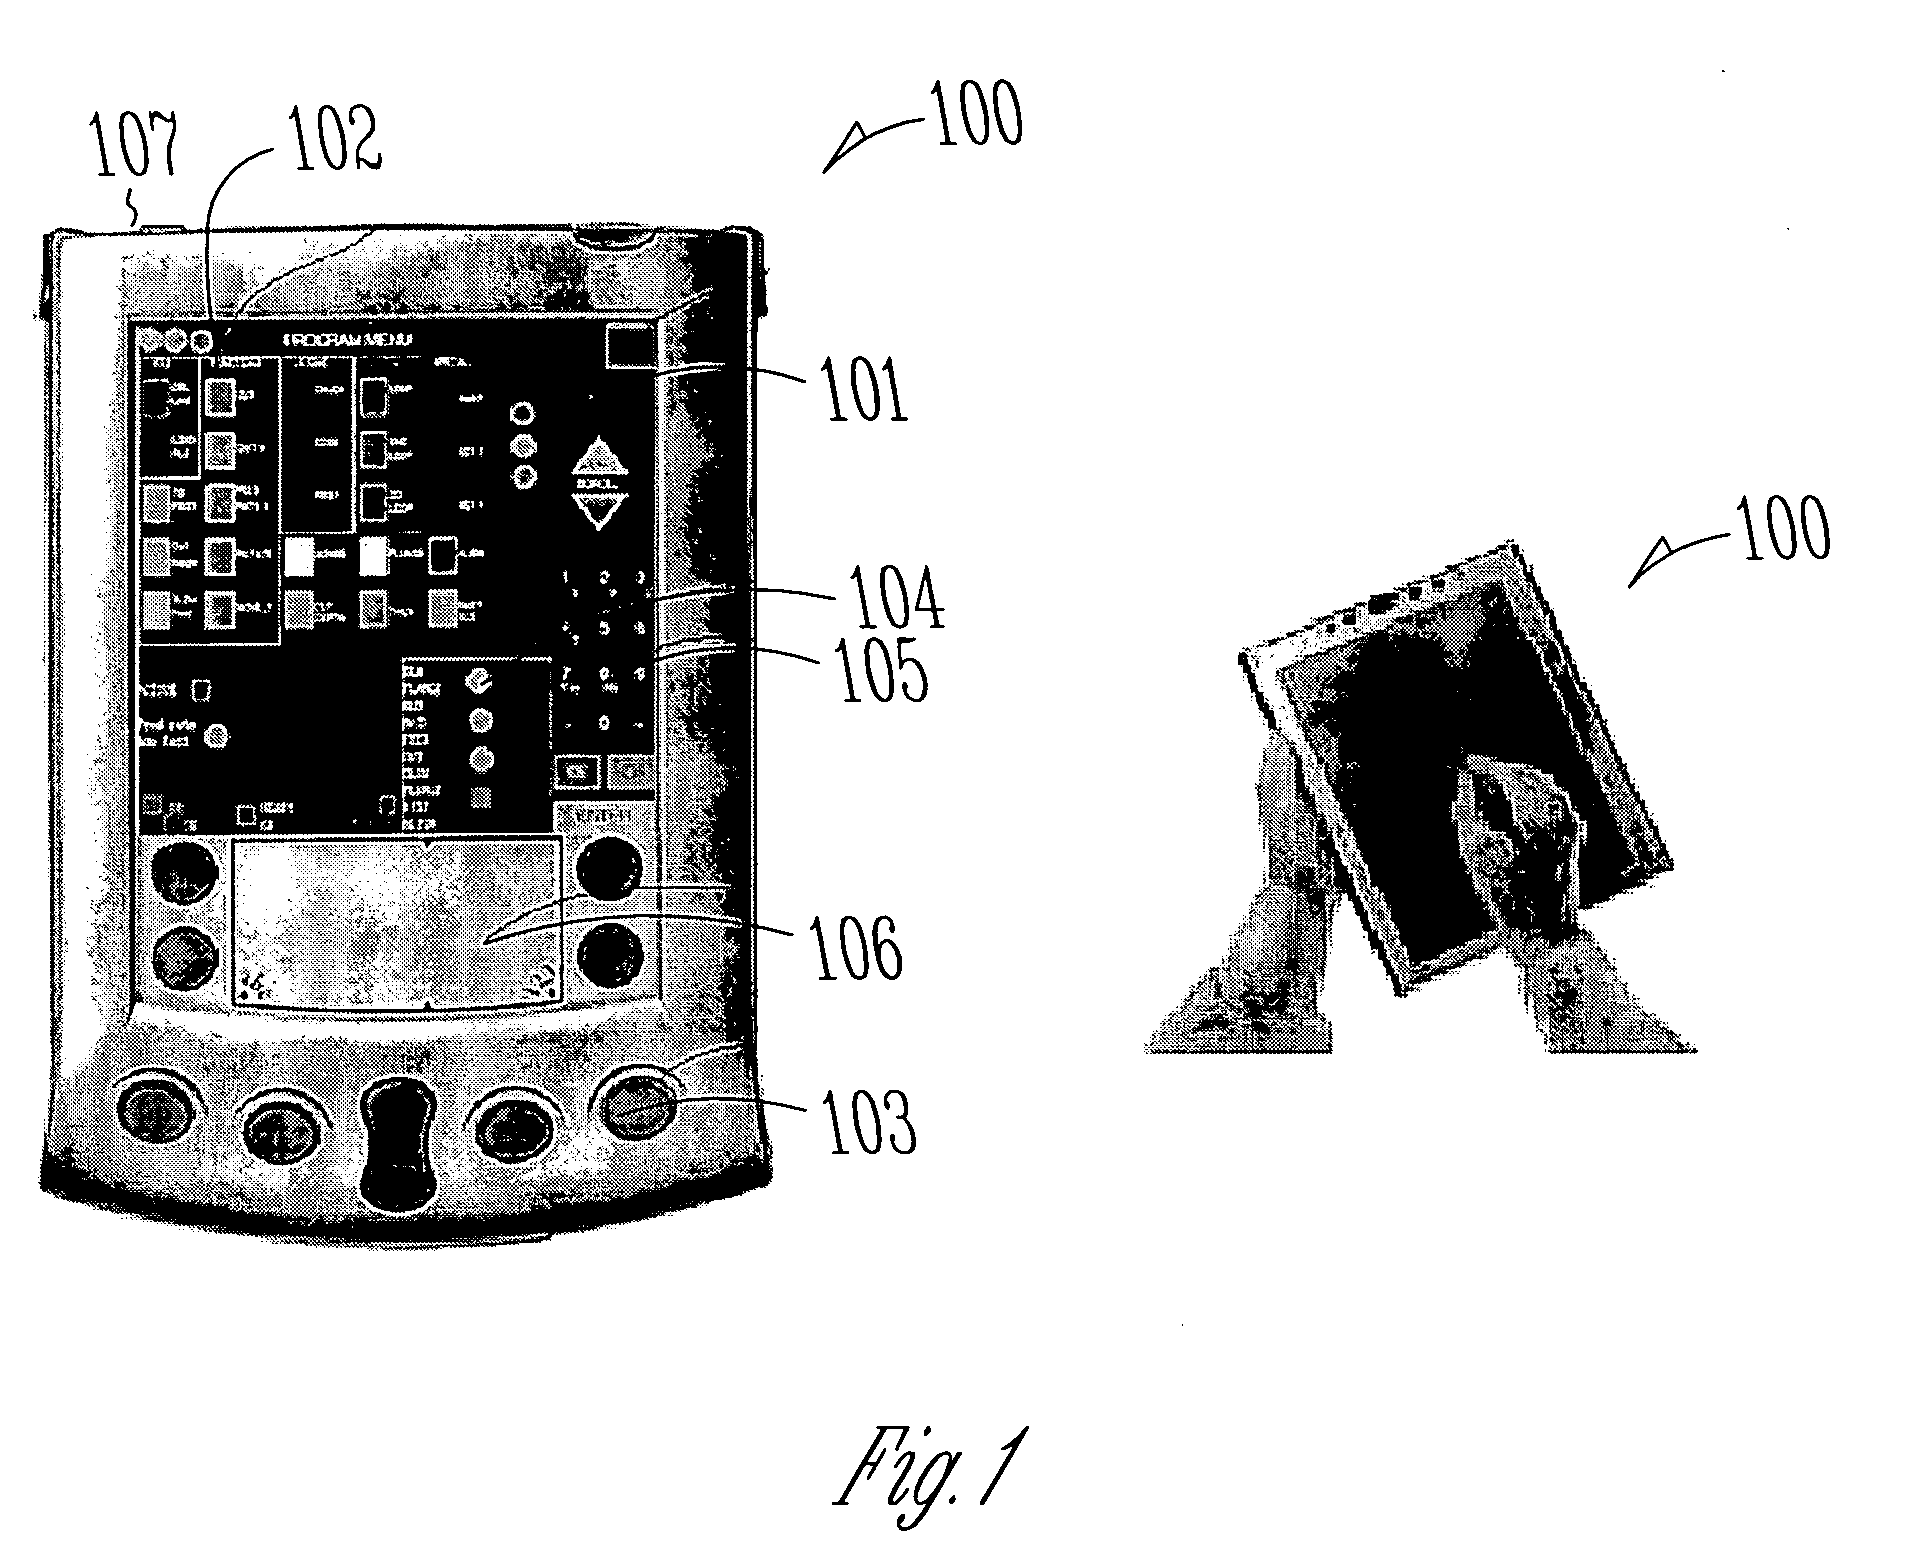 Method and apparatus for communication between a handheld programmer and an implantable medical device